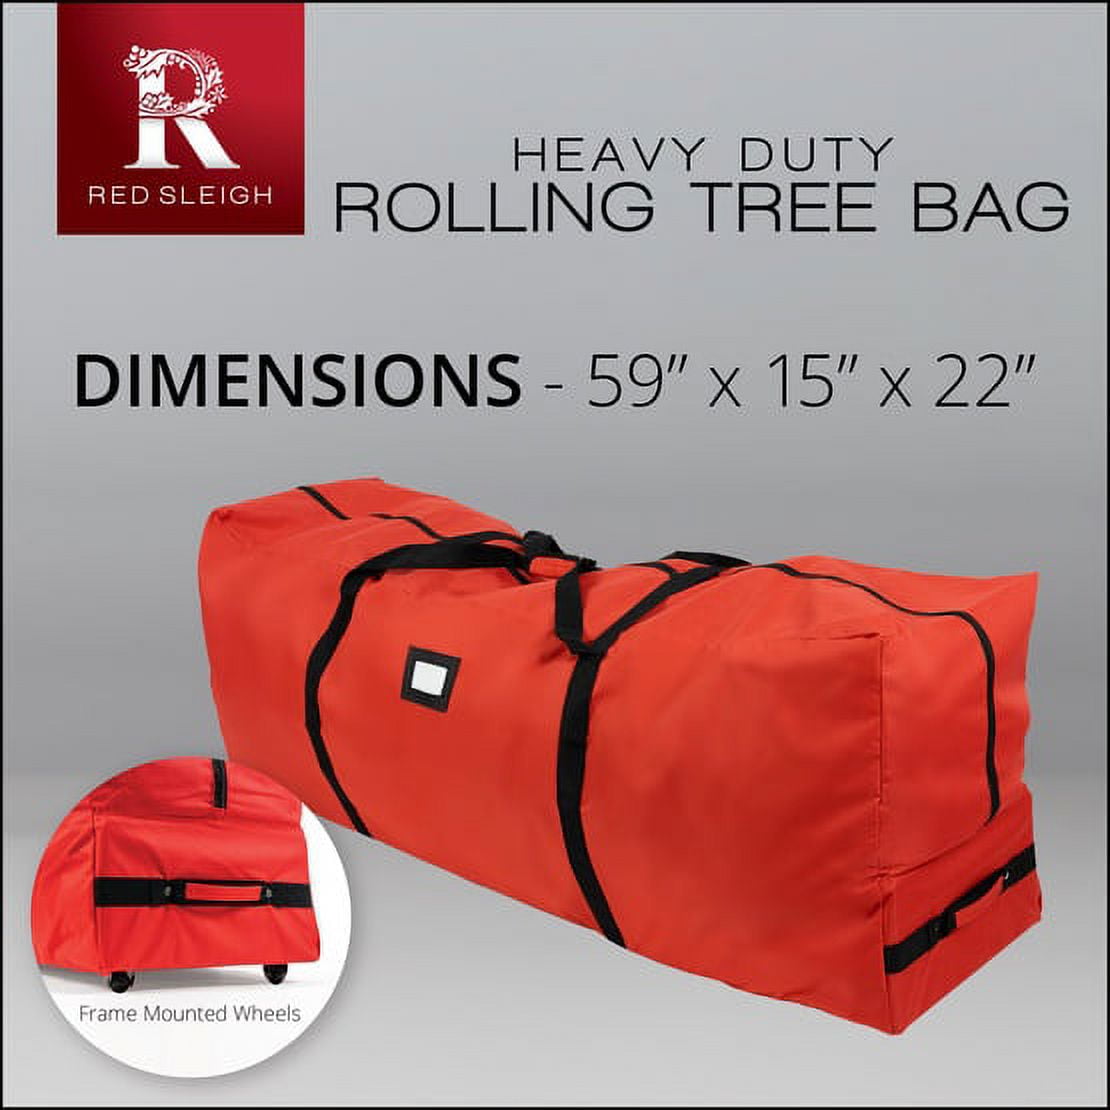 Red Sleigh Heavy Duty Rolling Artificial Christmas Tree Storage Bag for 6-9' Trees